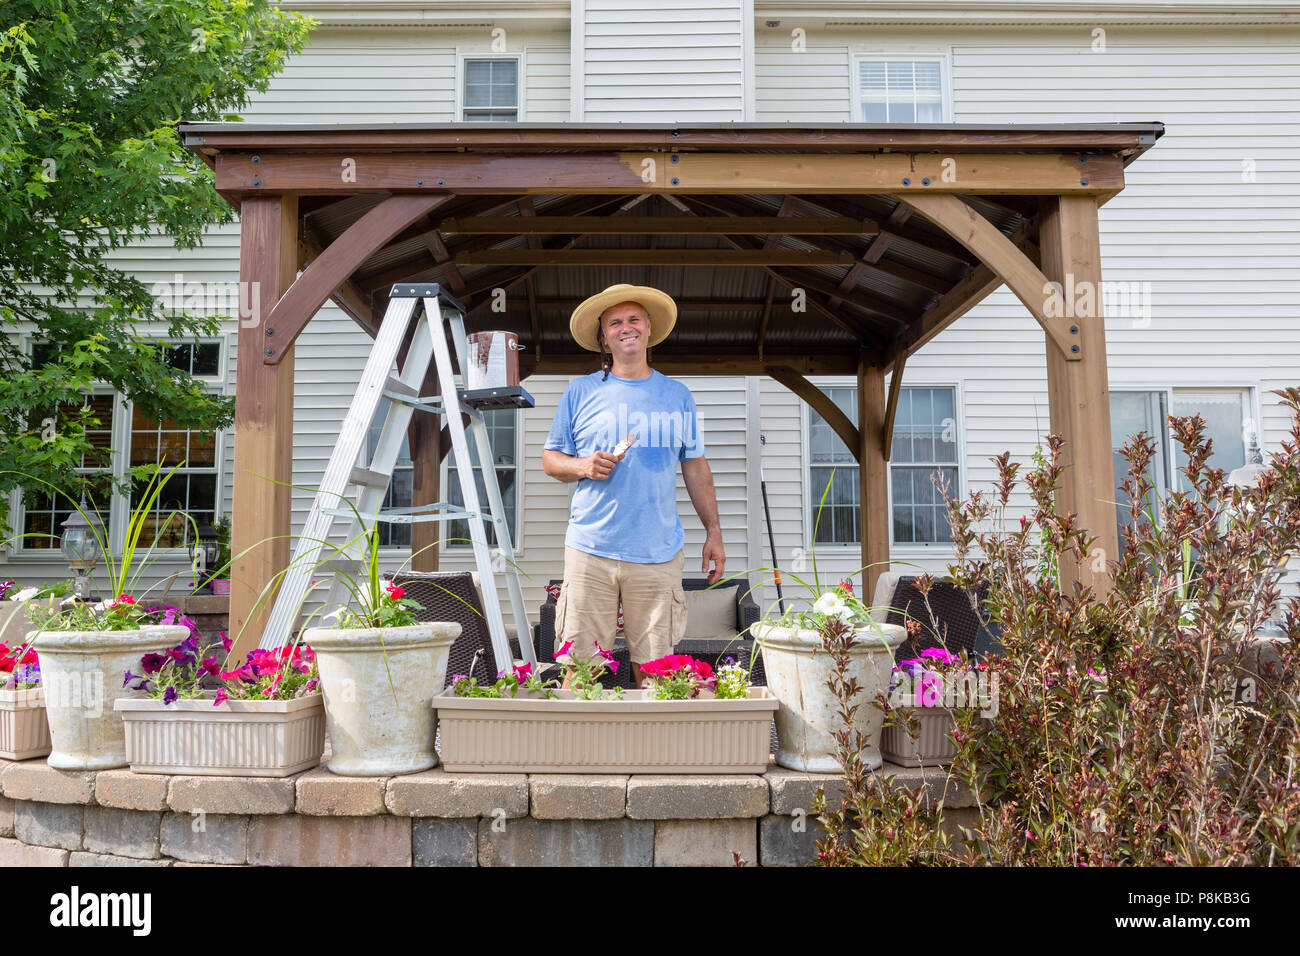 Pleased satisfied man staining a new gazebo installed on his rear patio in front of his house standing smiling at the camera Stock Photo